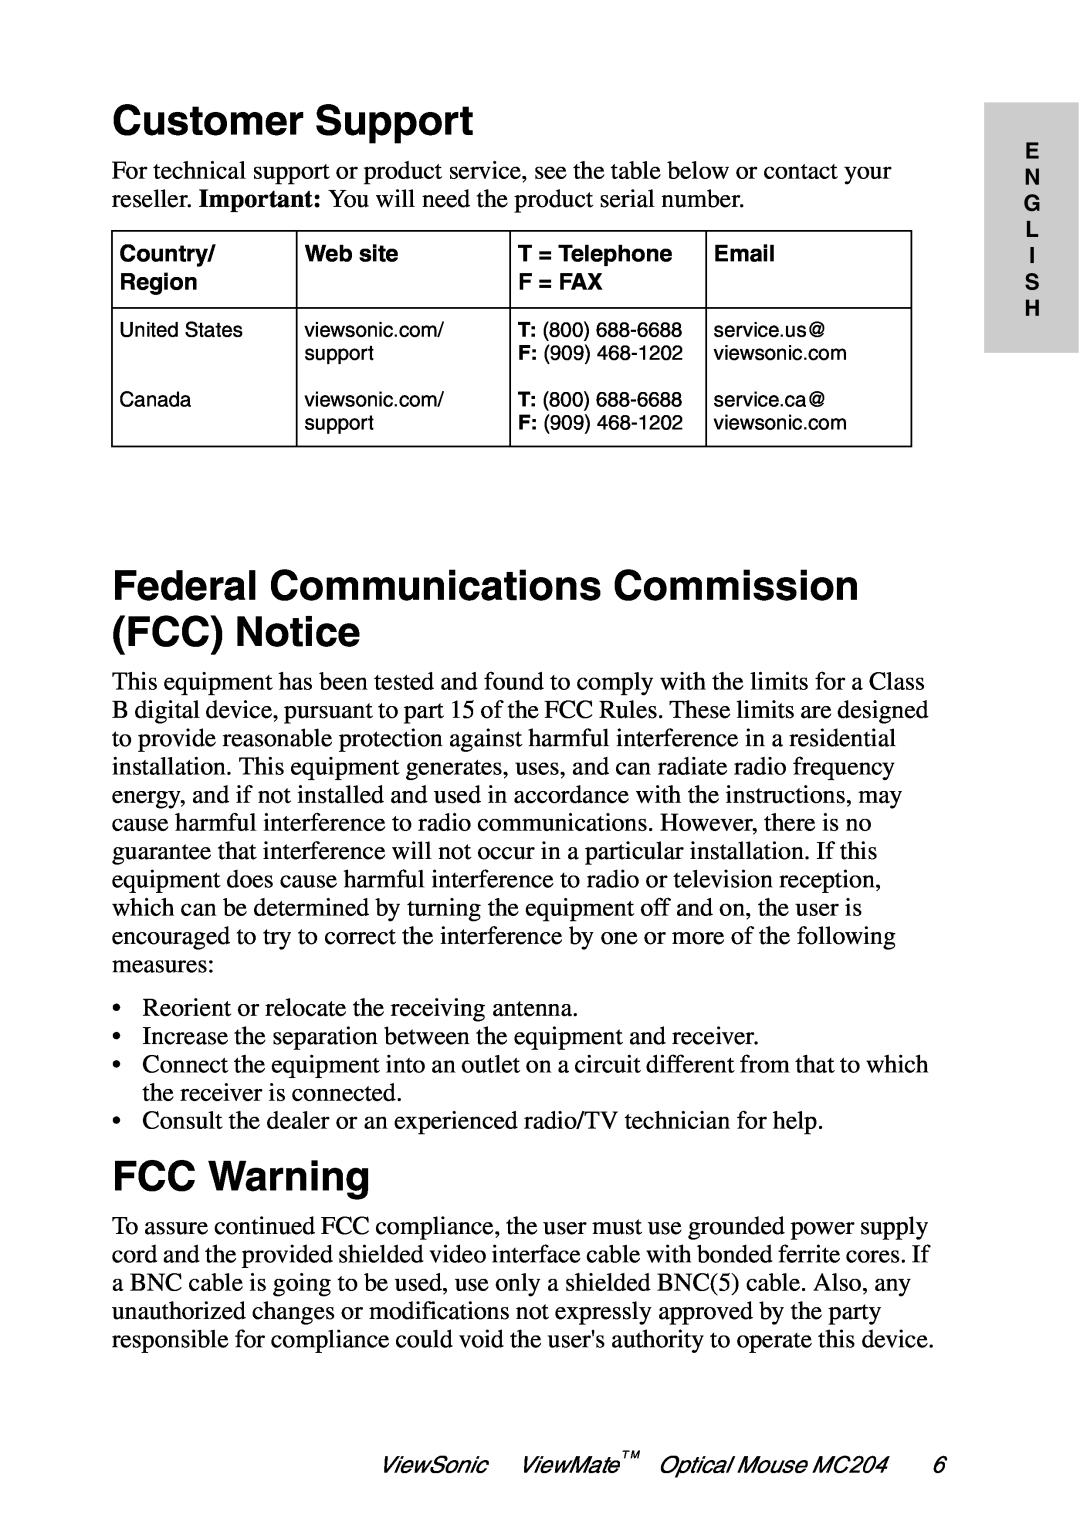 ViewSonic MC204 manual Customer Support, Federal Communications Commission FCC Notice, FCC Warning 